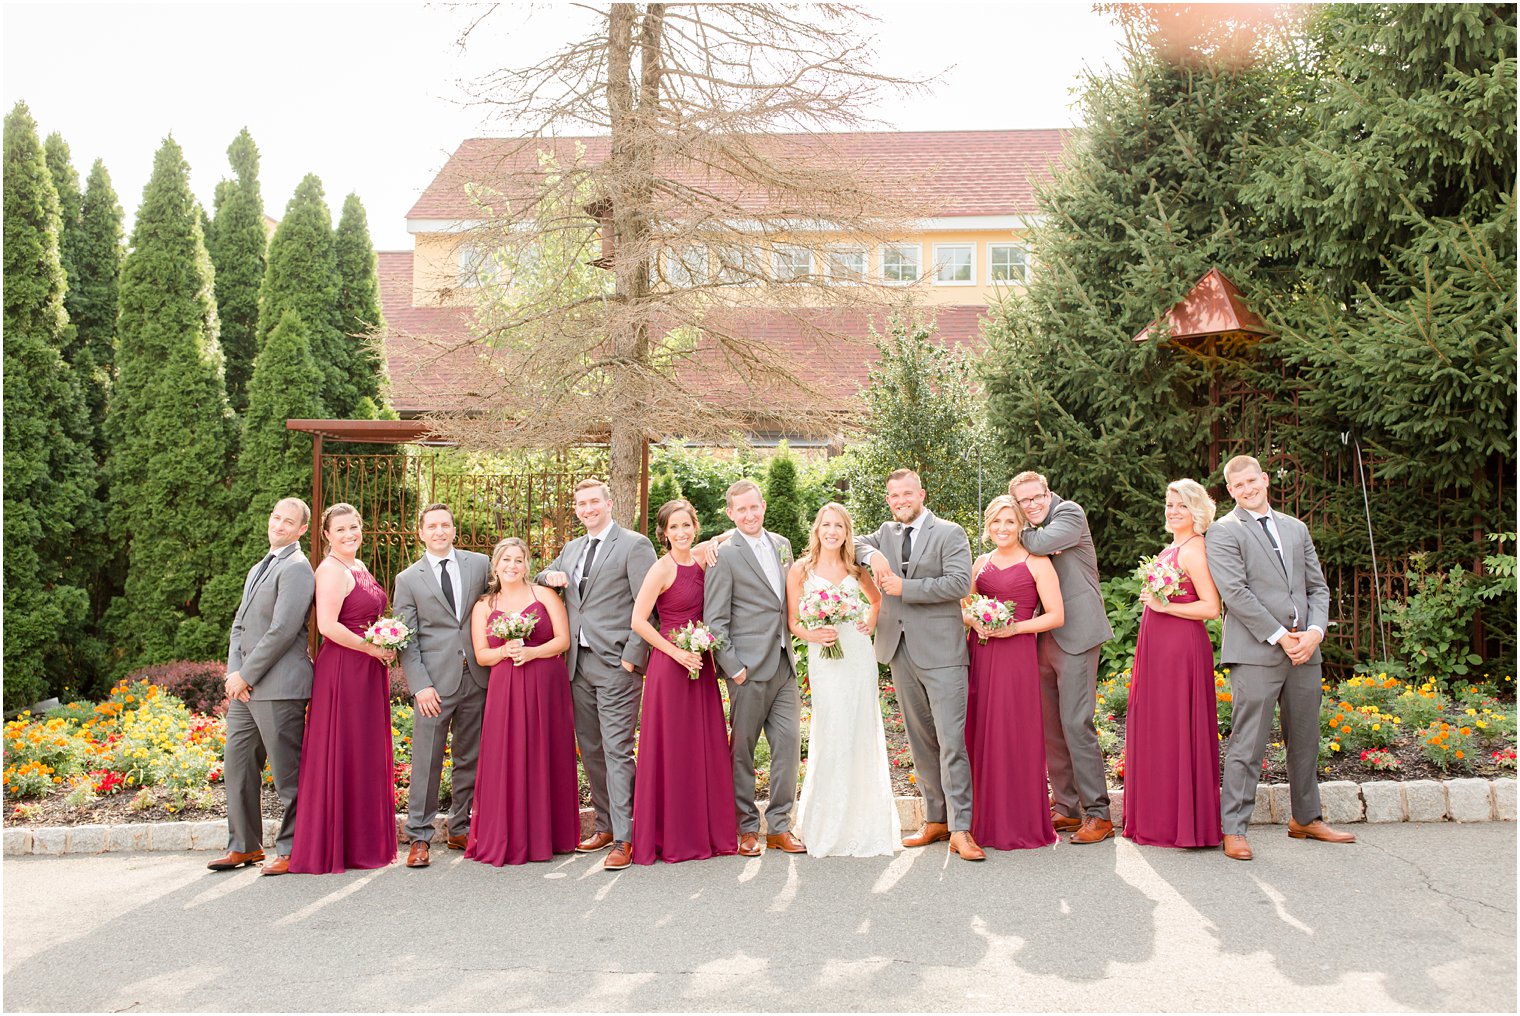 Bridal party photos at Stone House at Stirling Ridge in Warren, NJ